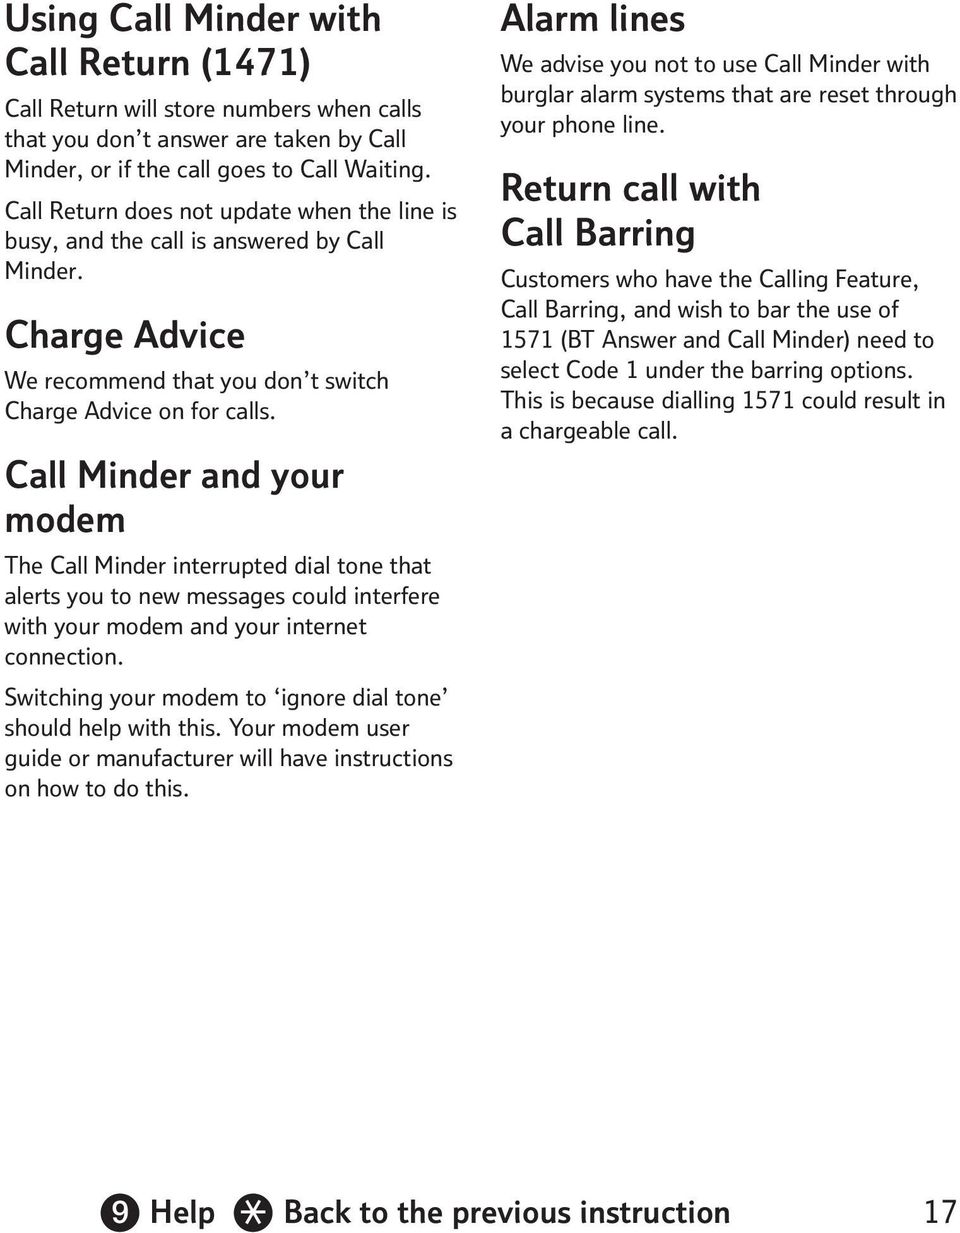 Call Minder and your modem The Call Minder interrupted dial tone that alerts you to new messages could interfere with your modem and your internet connection.